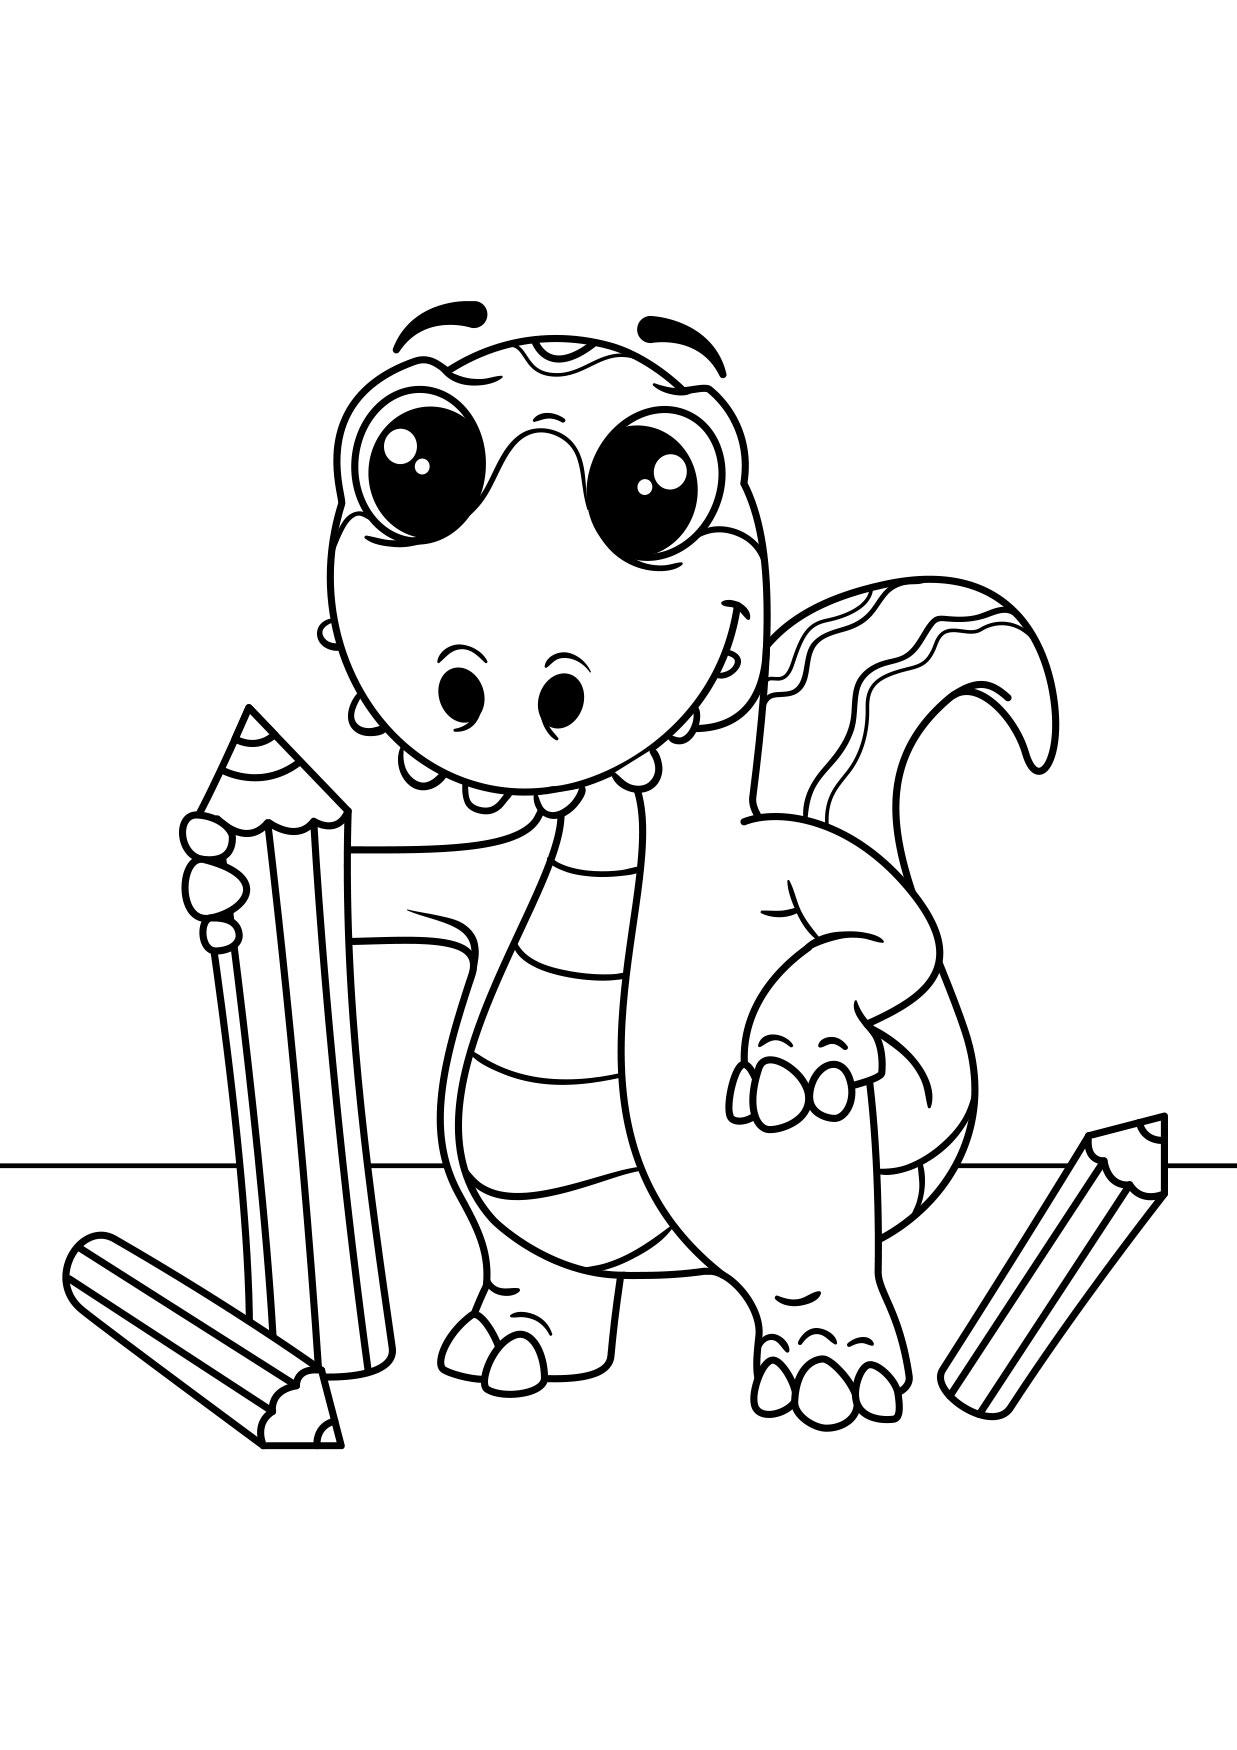 Coloring Page dinosaur draws - free printable coloring pages - Img 30978